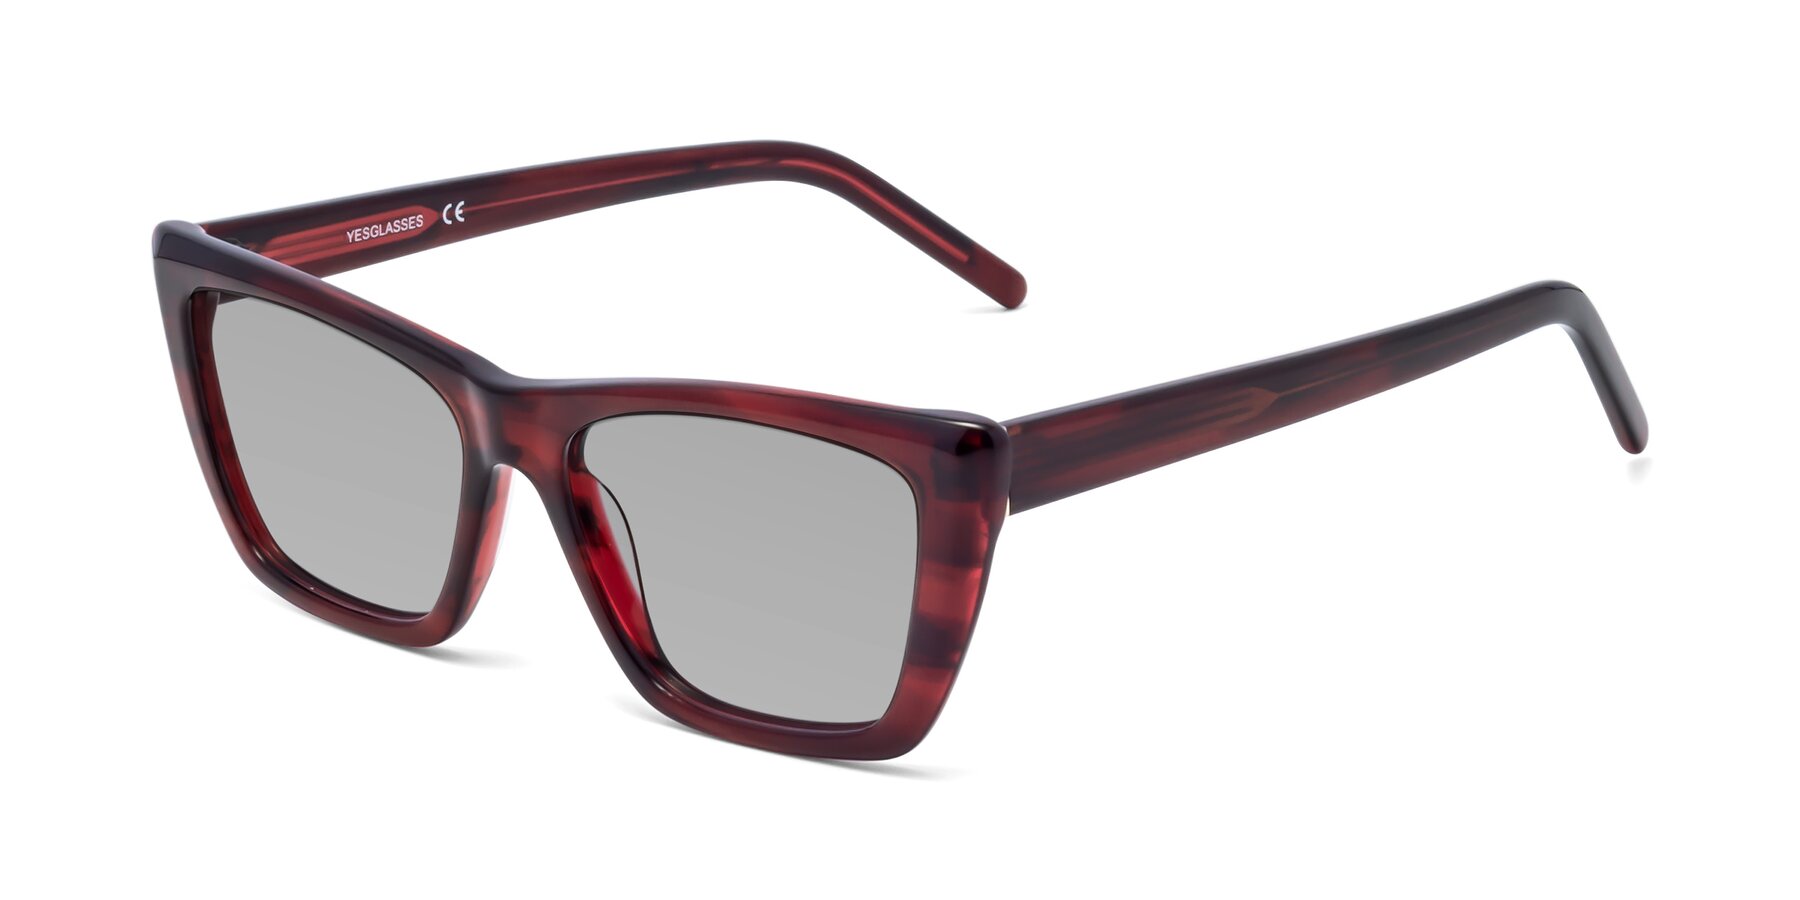 Angle of 1494 in Stripe Wine with Light Gray Tinted Lenses